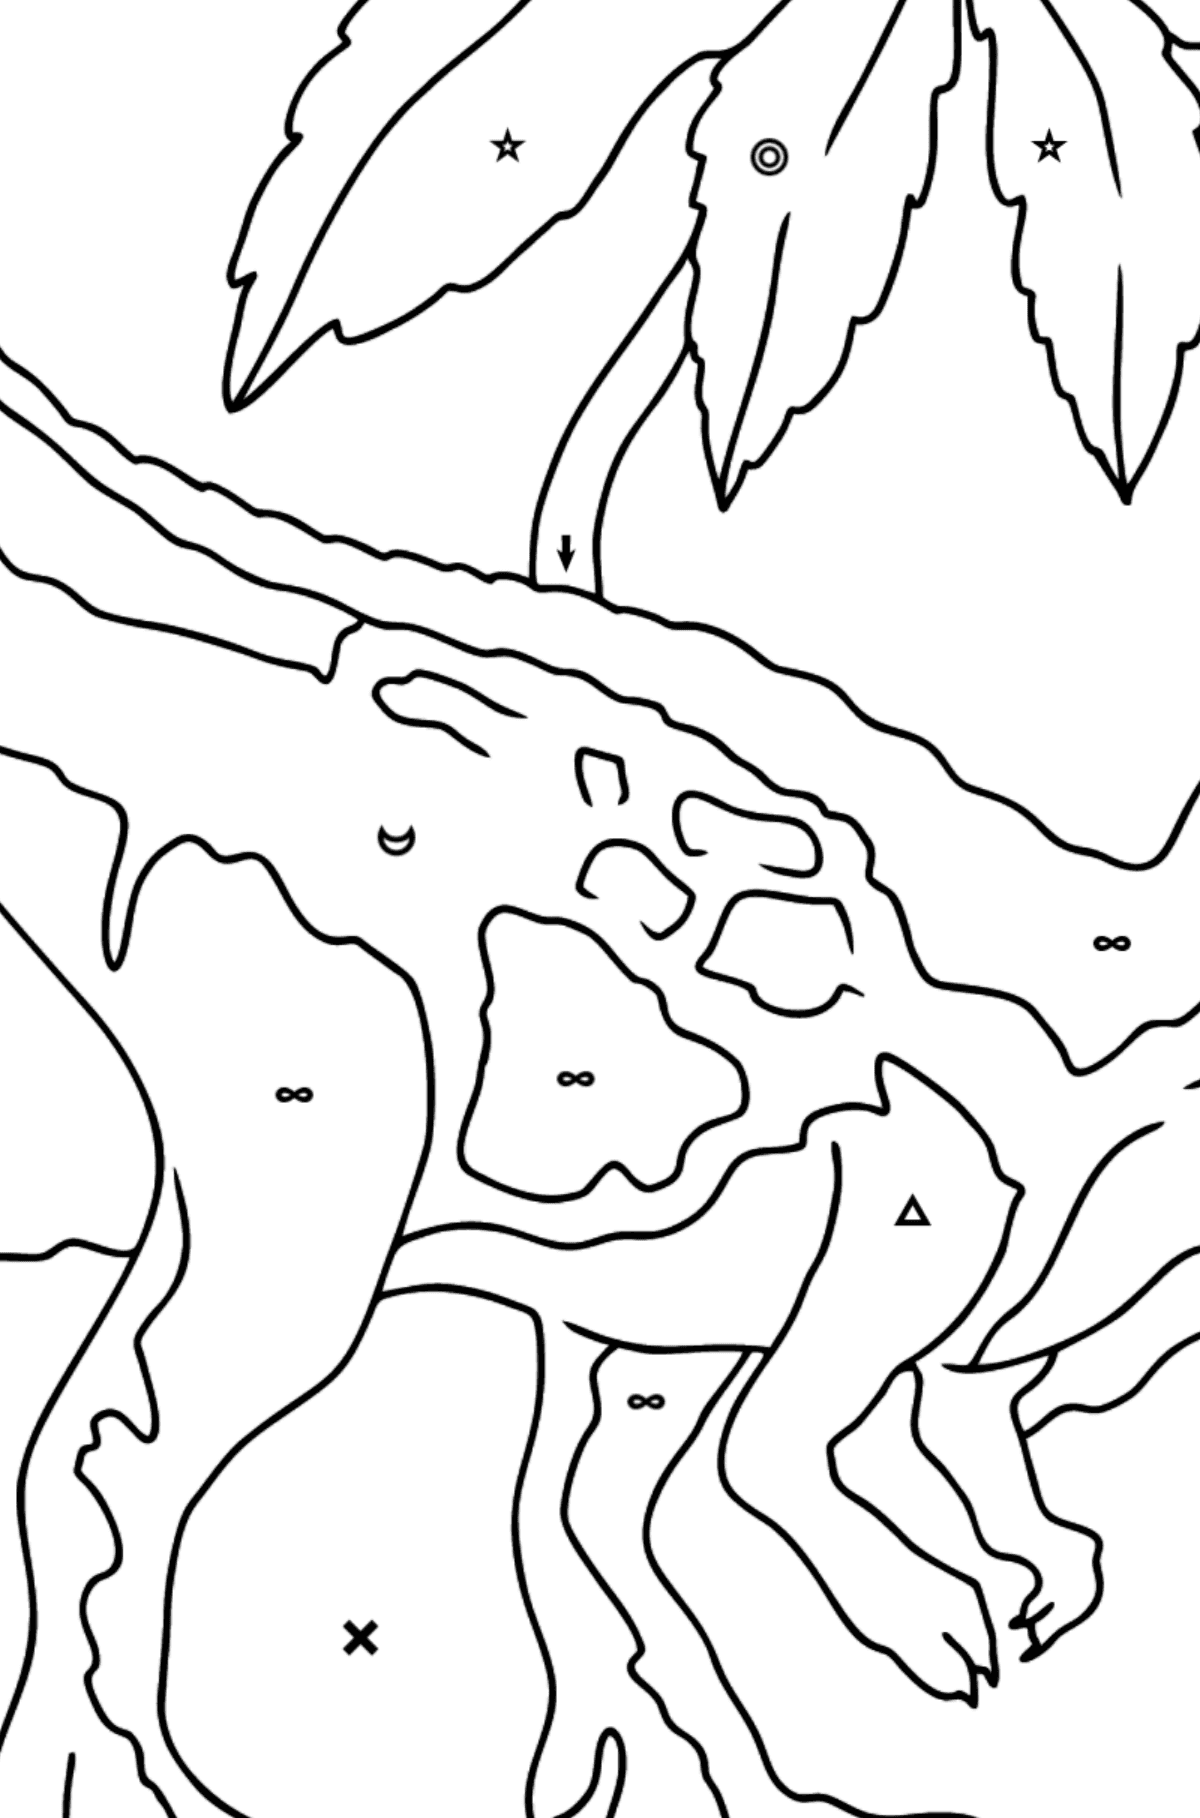 Coloring Page - Tyrannosaurus - A Terrestrial Predator - Coloring by Symbols and Geometric Shapes for Kids